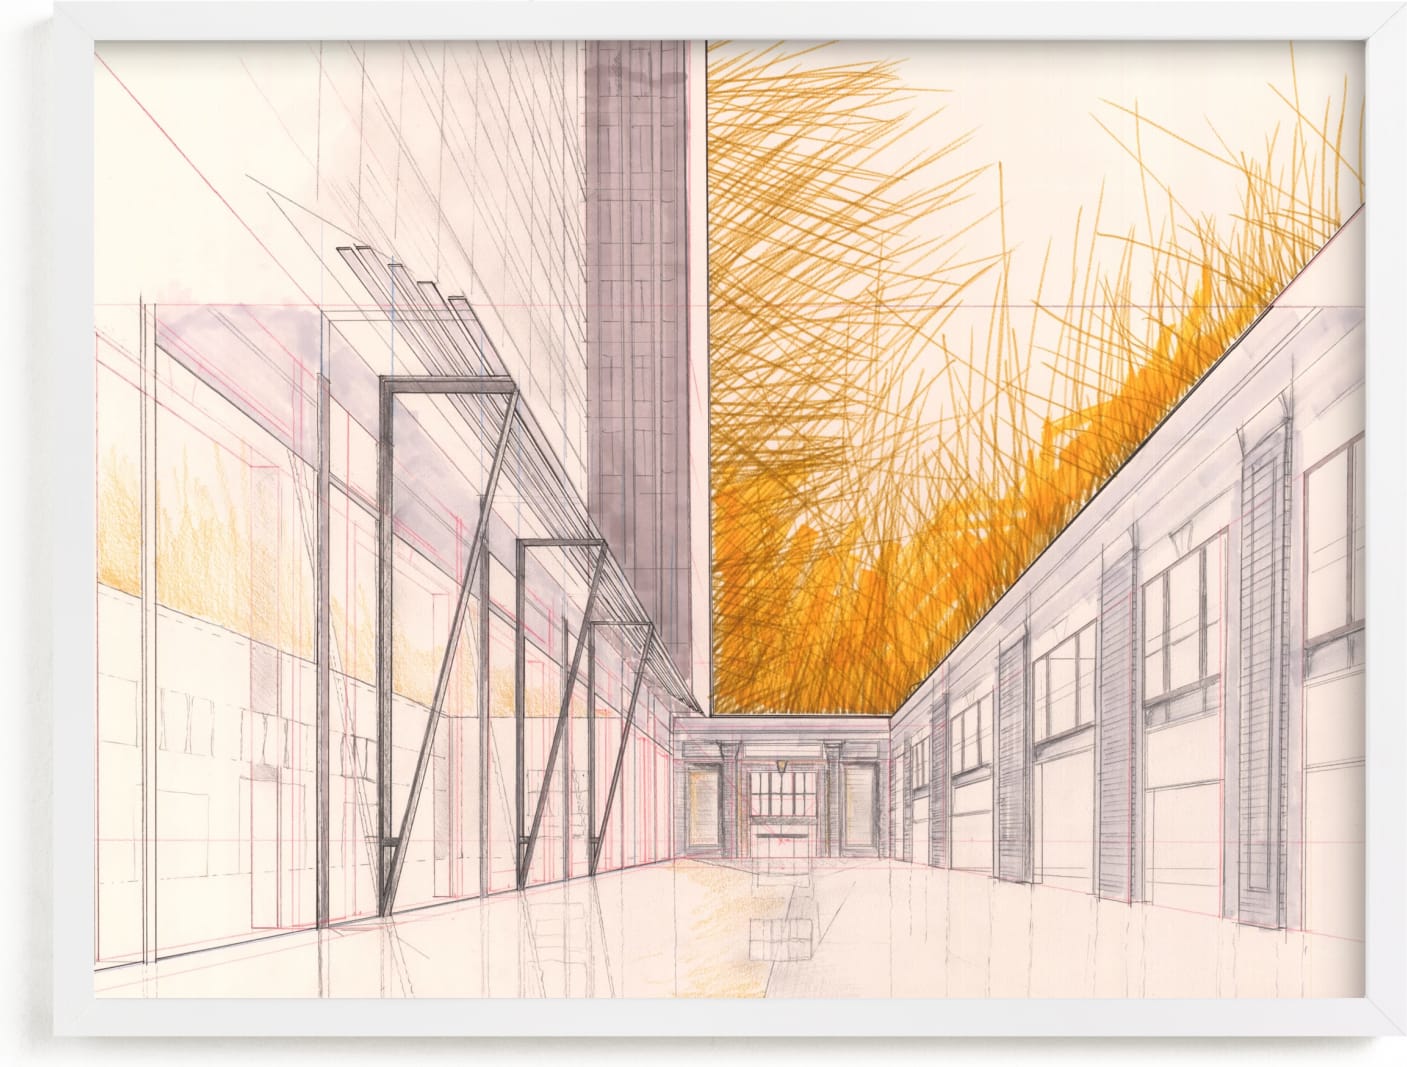 This is a yellow art by Paul Devitt called Concourse.